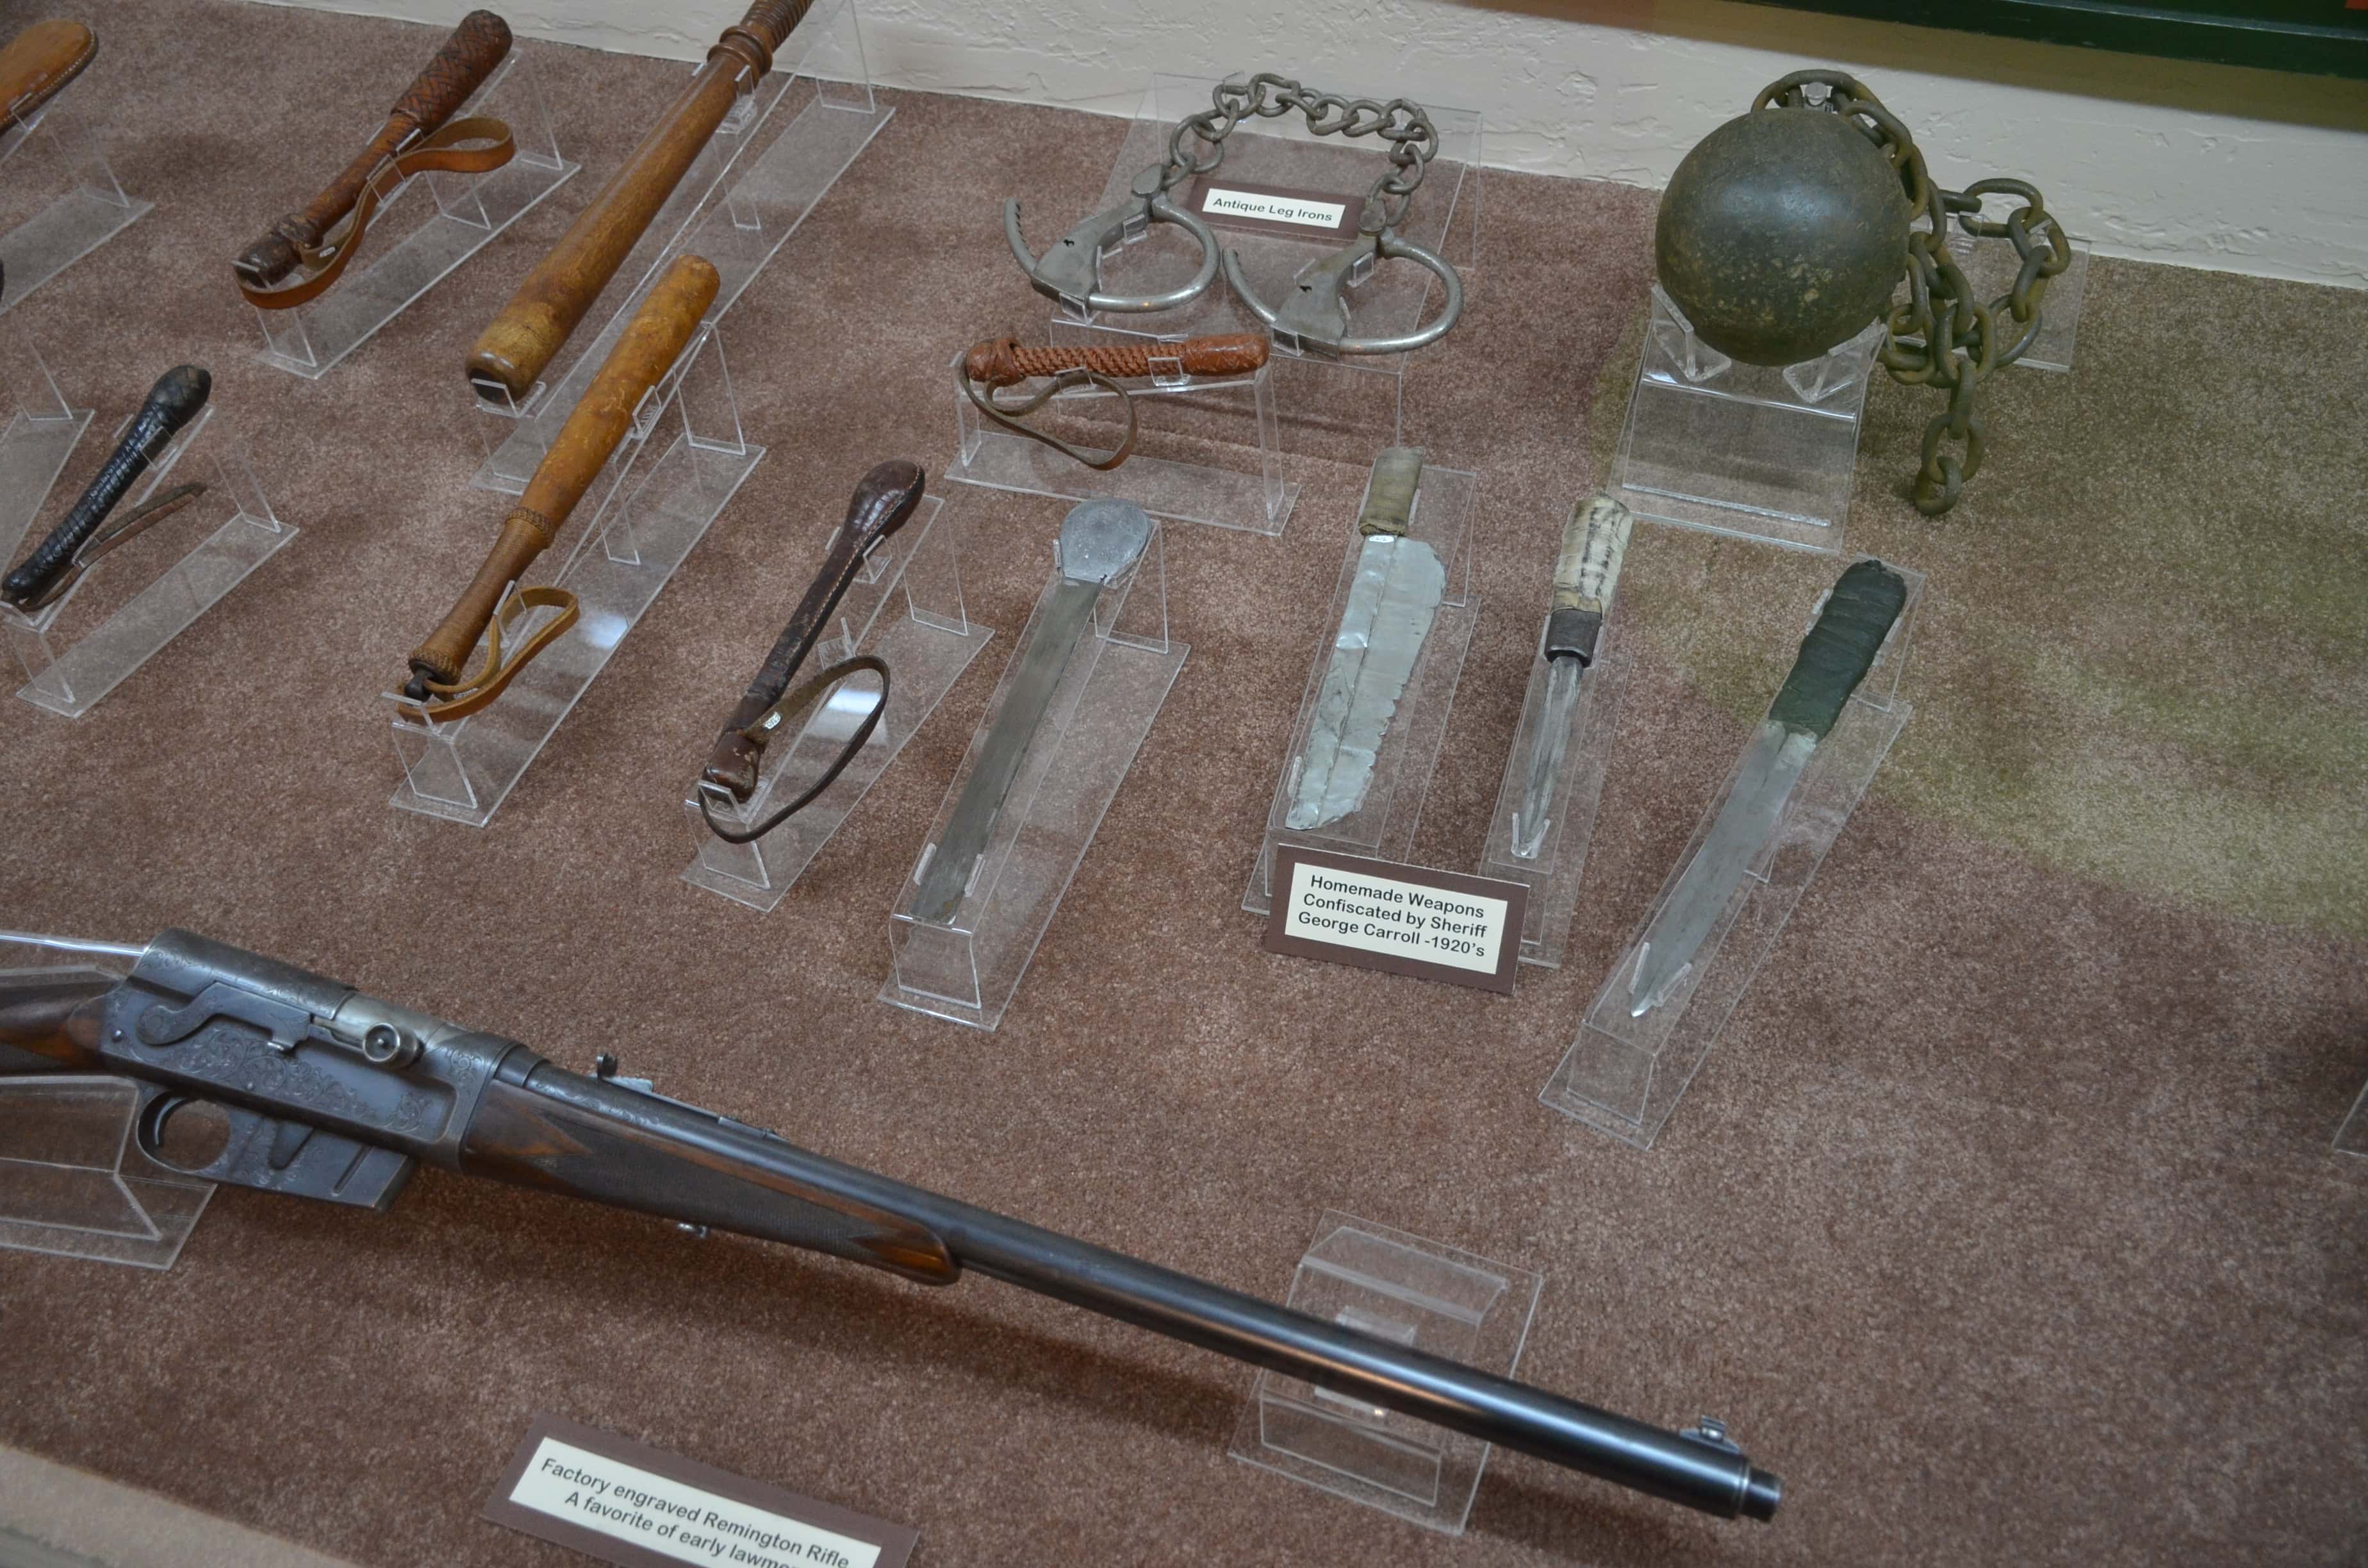 Confiscated homemade weapons at the Nelson Museum of the West in Cheyenne, Wyoming